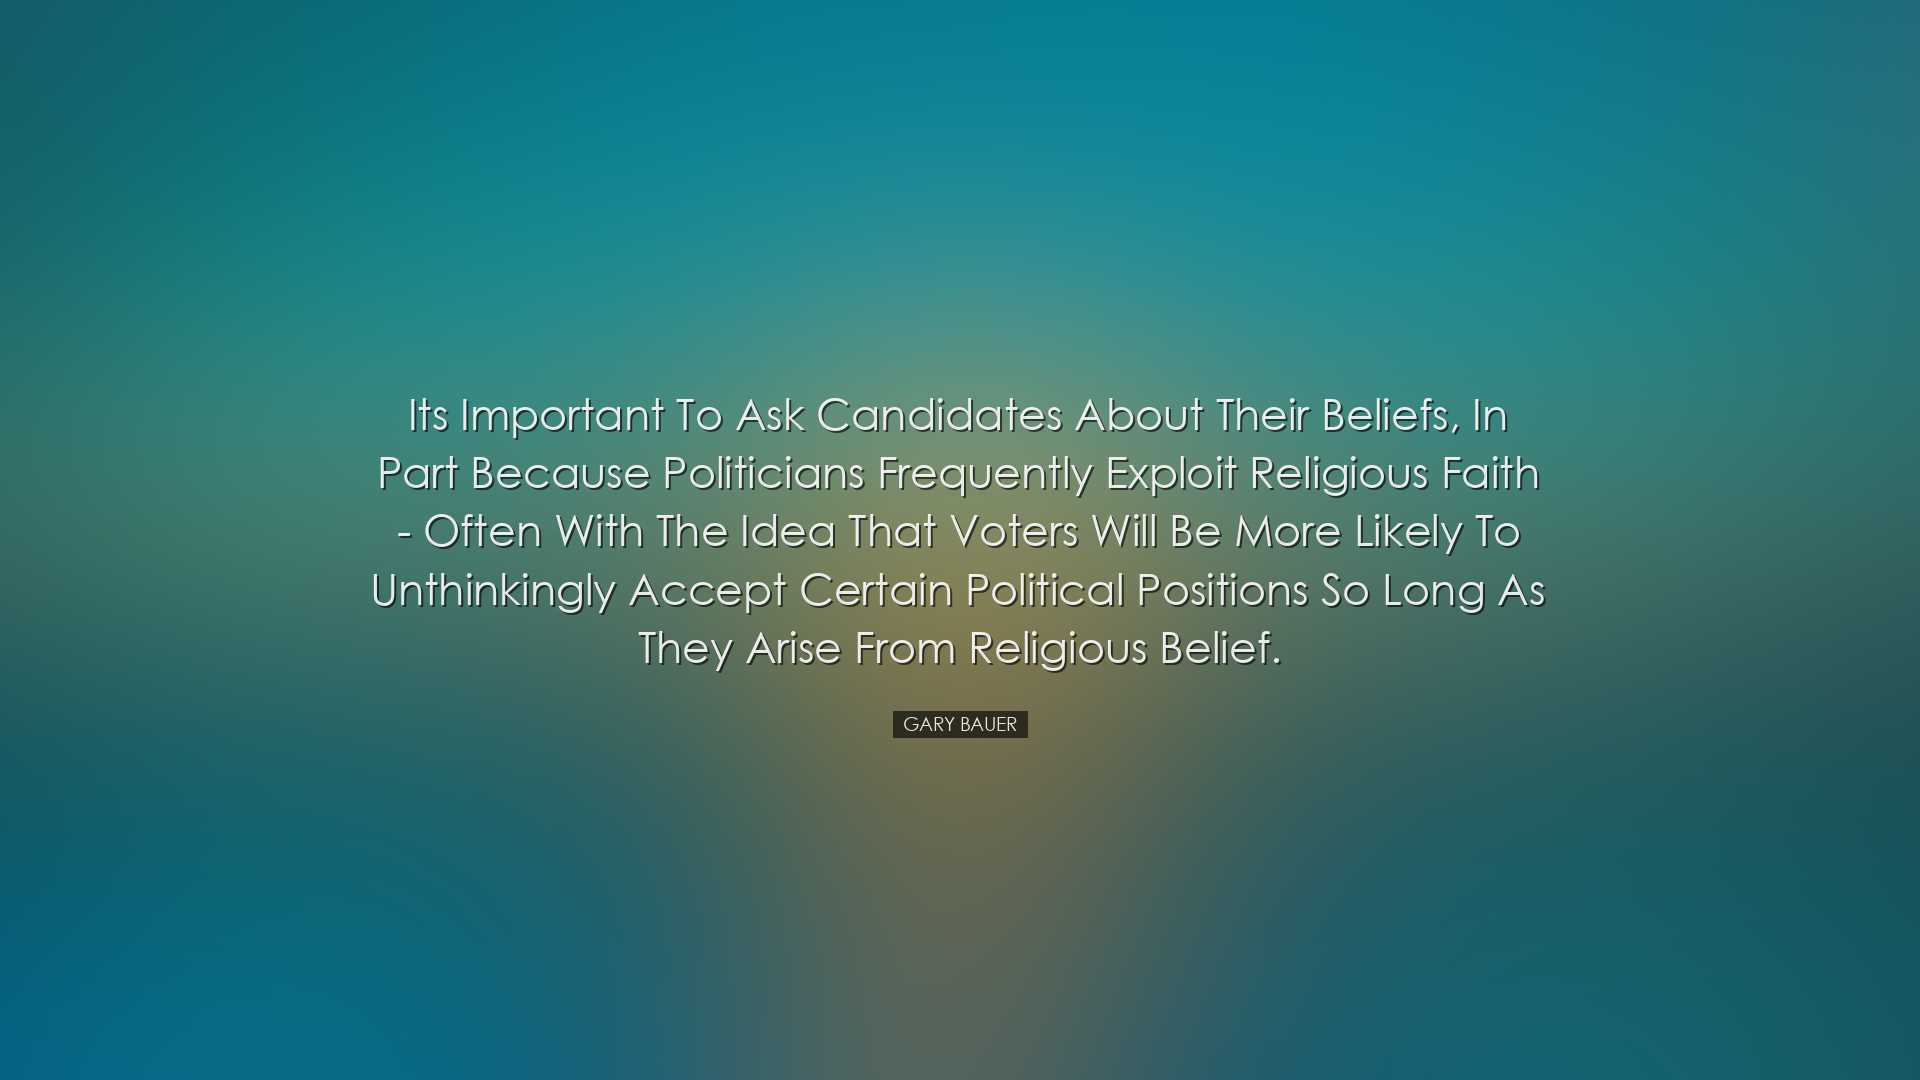 Its important to ask candidates about their beliefs, in part becau